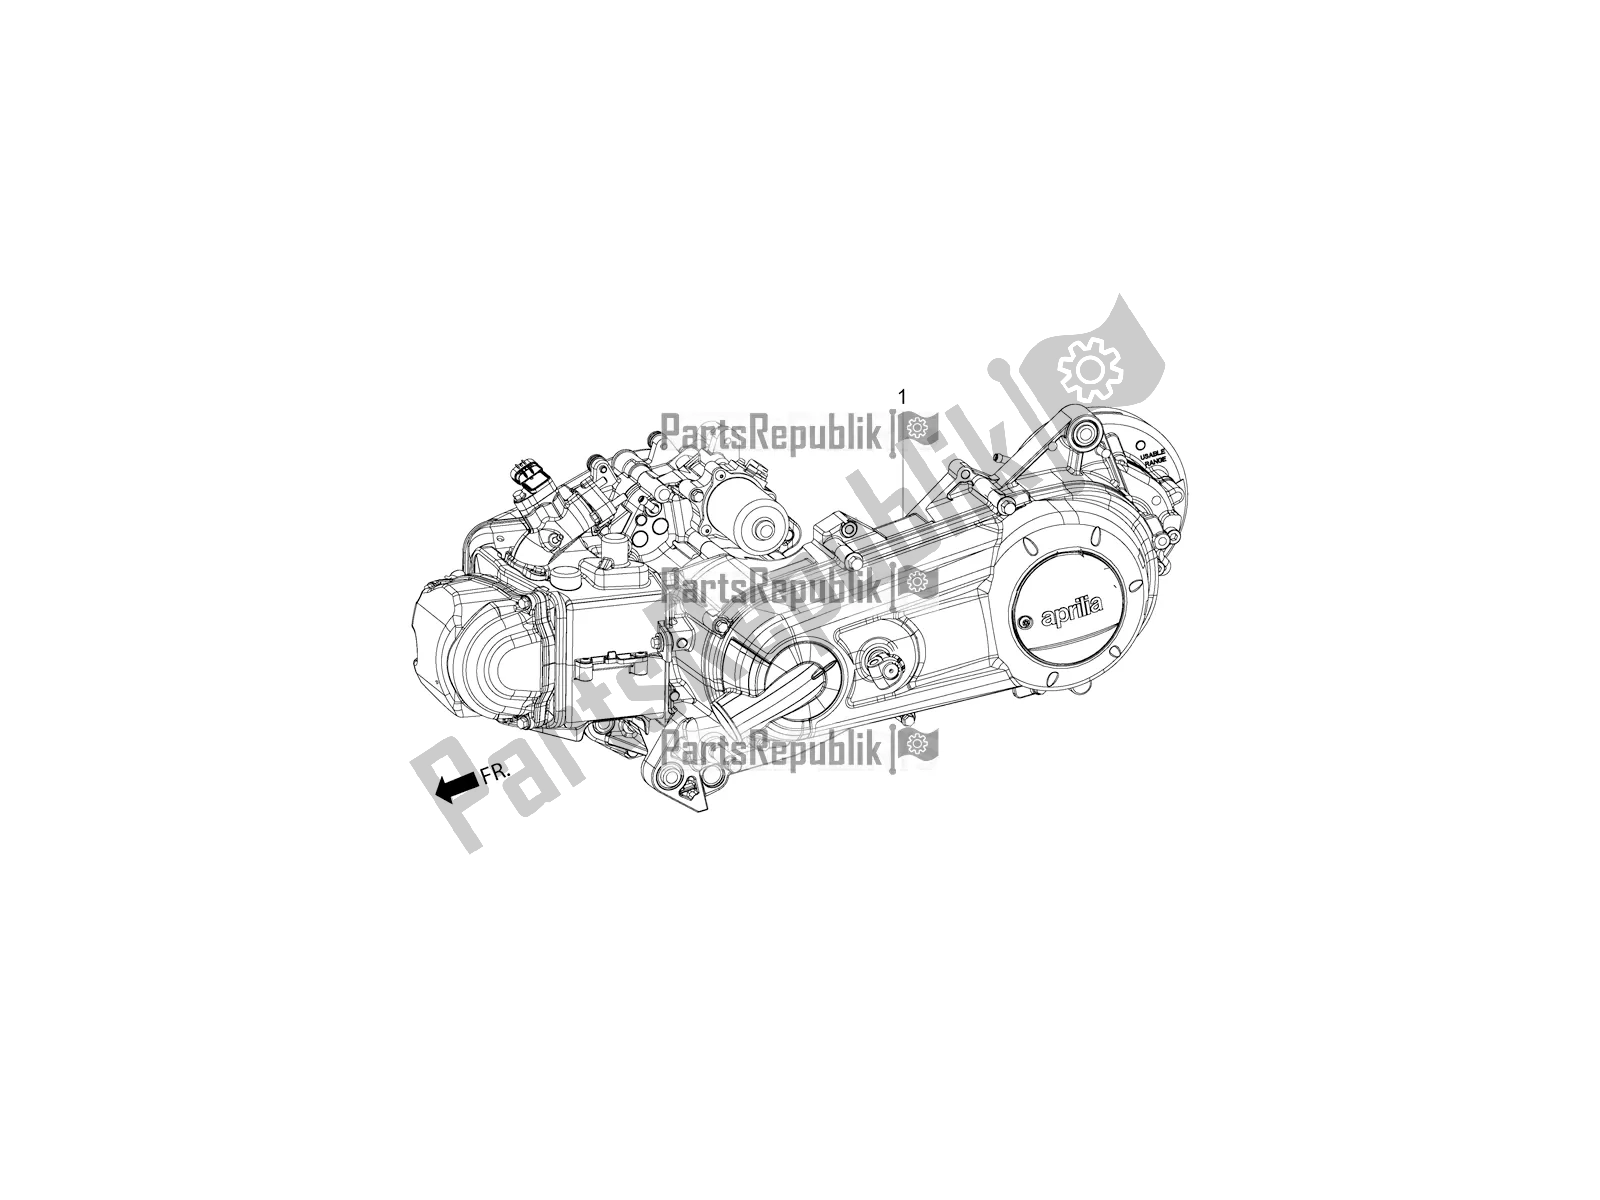 All parts for the Complete Engine of the Aprilia SR 150 4 T/3V 2019